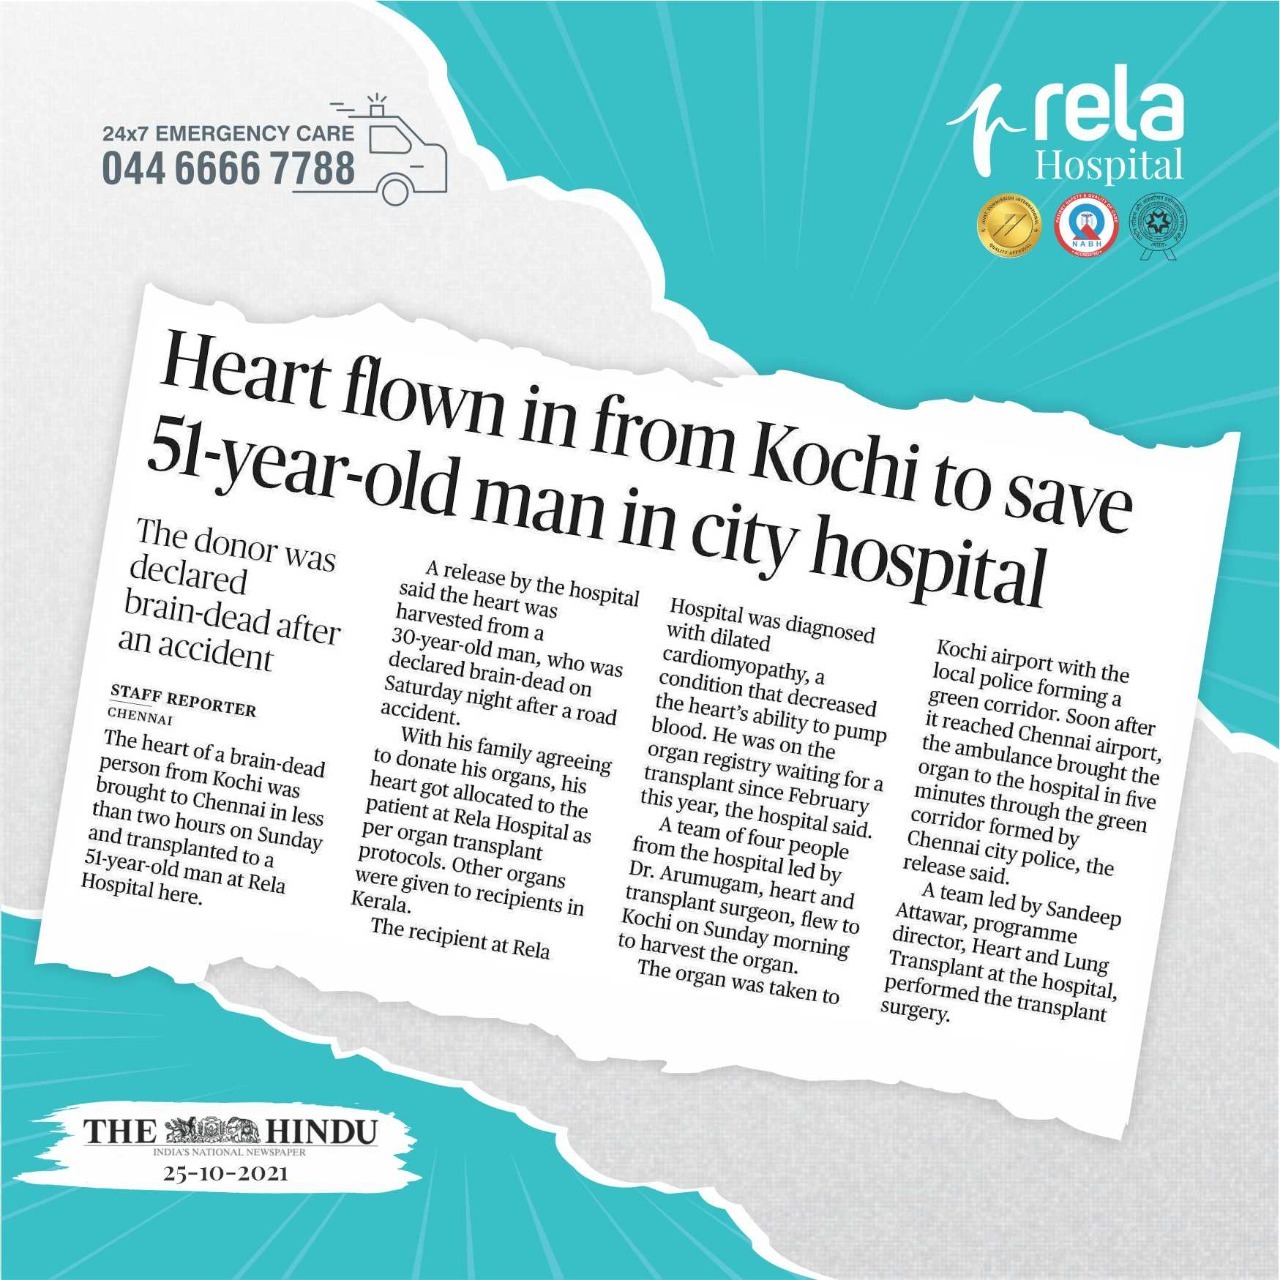 Heart Flown From Kochi, Saves The Life Of 51-Year-Old Man